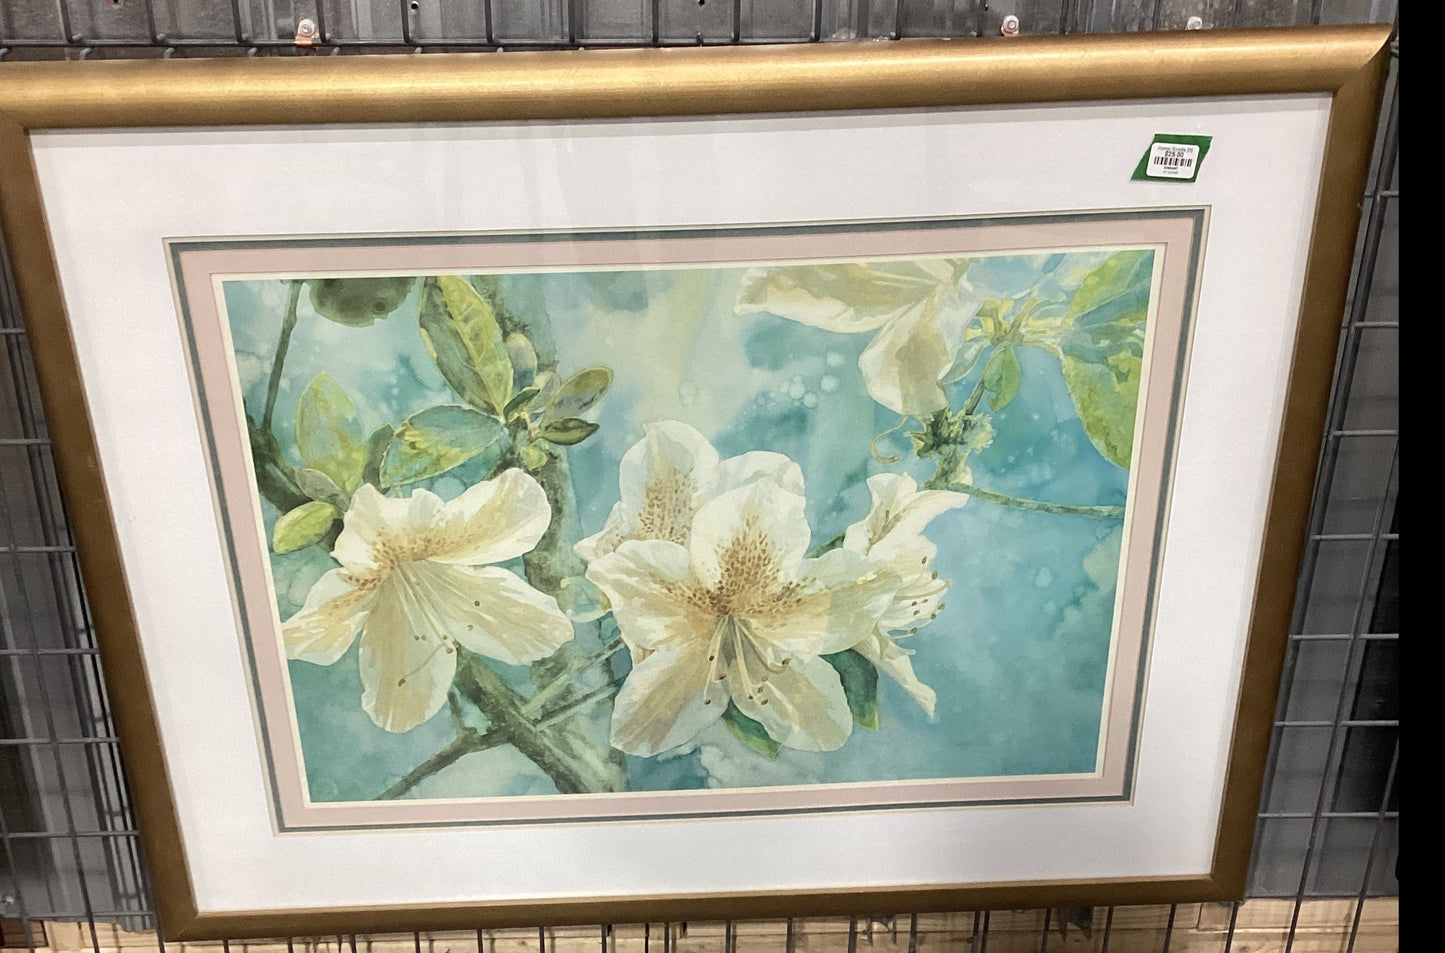 A framed painting of white flowers hanging on a wall.